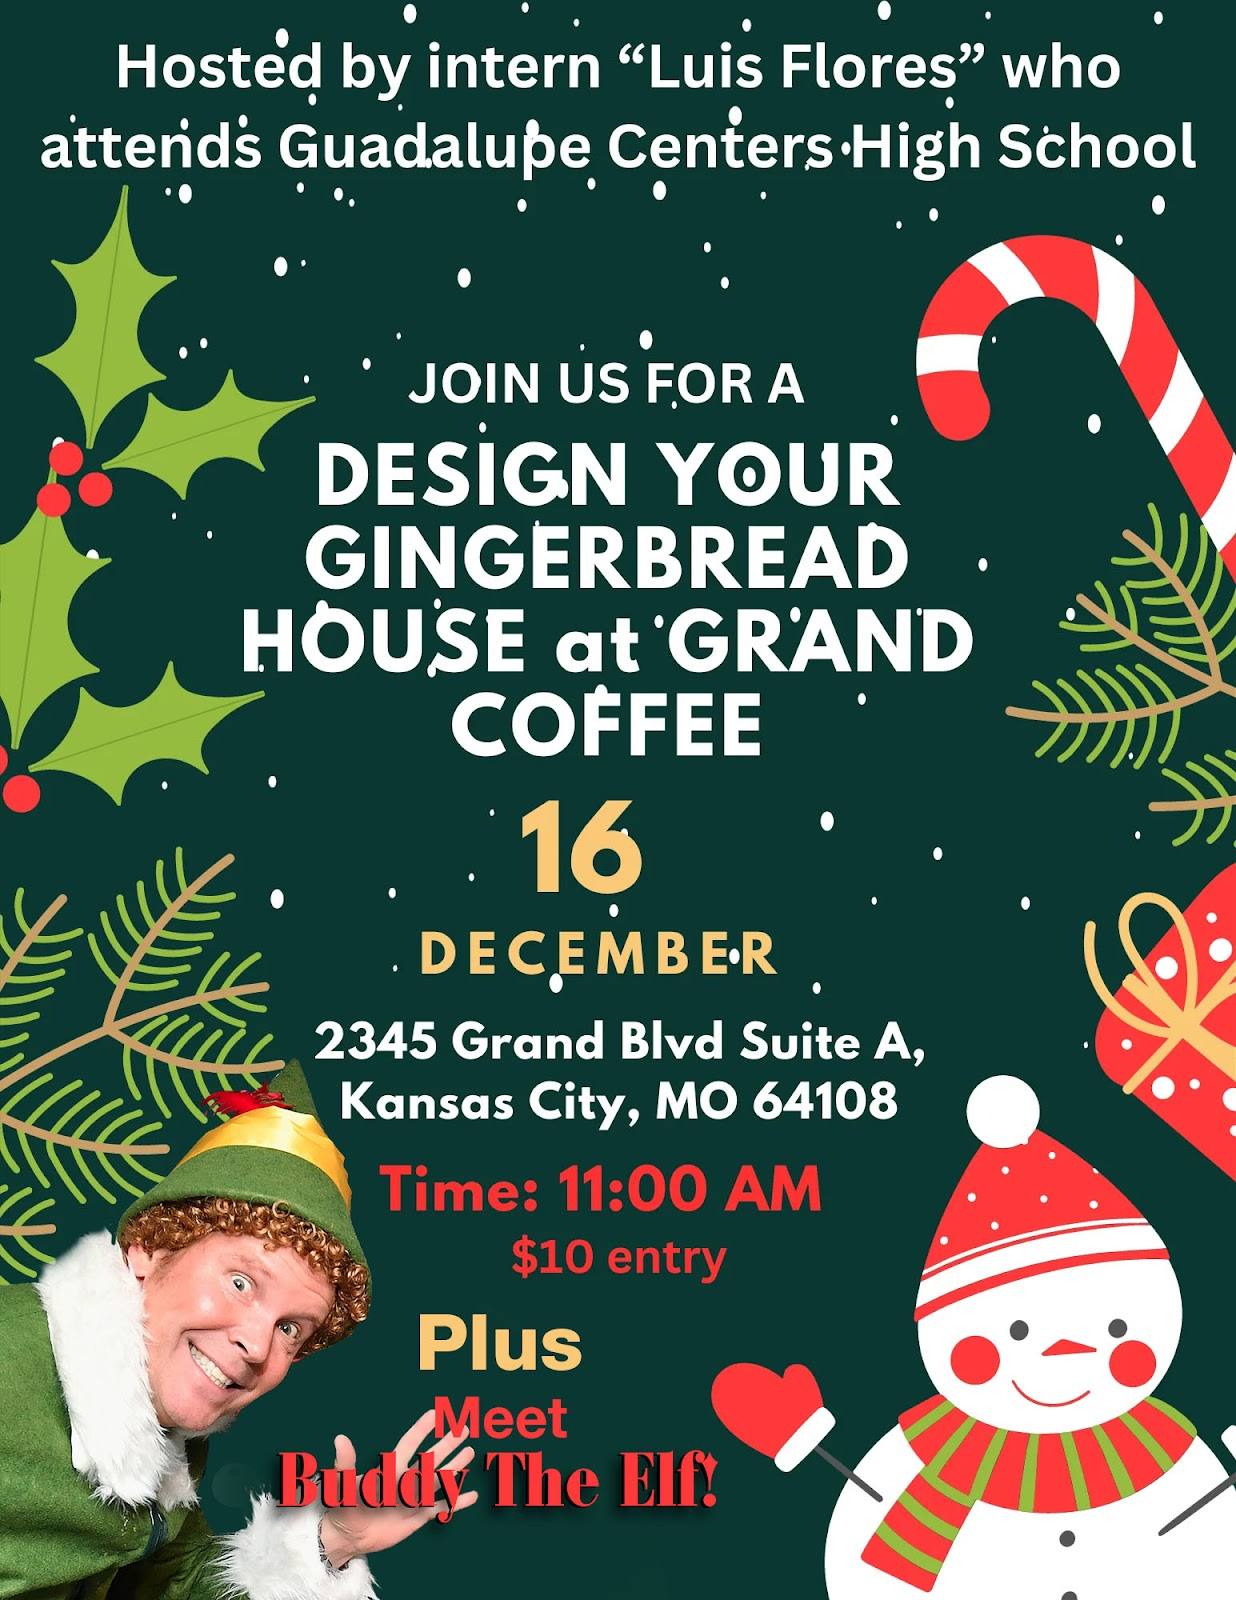 Design your gingerbread house at grand coffee flyer.